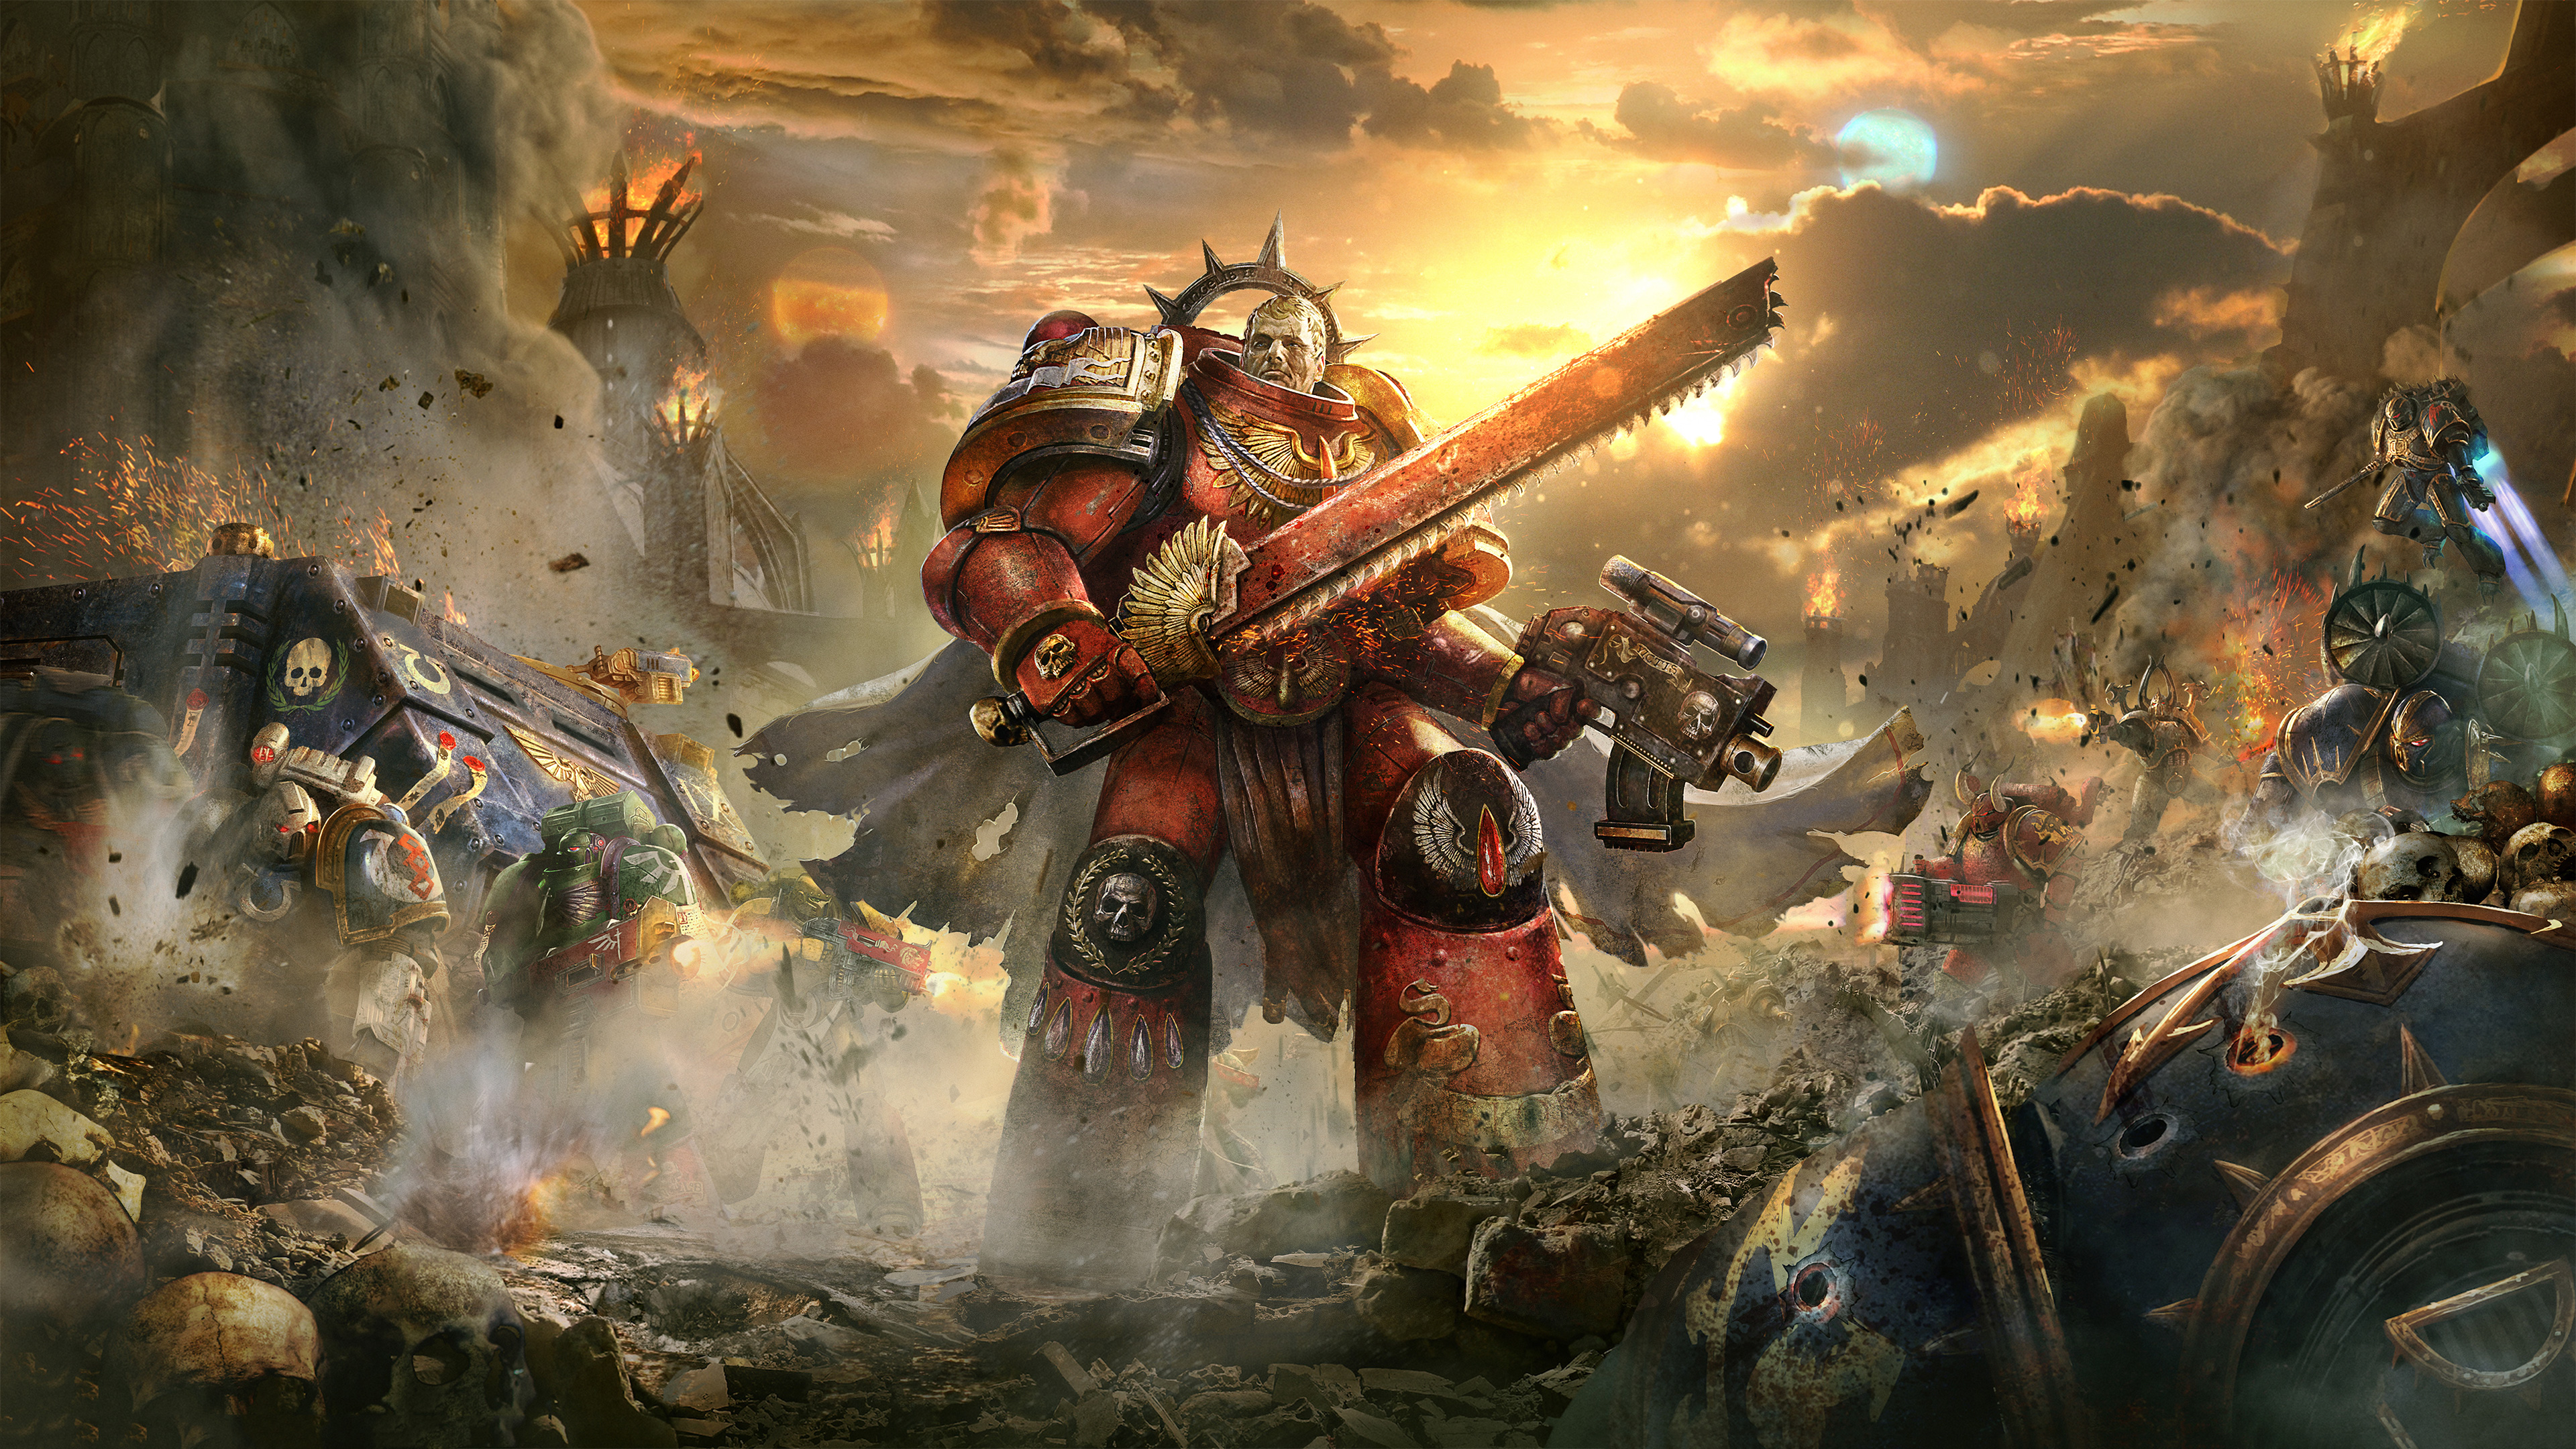 Live Wallpapers tagged with Warhammer